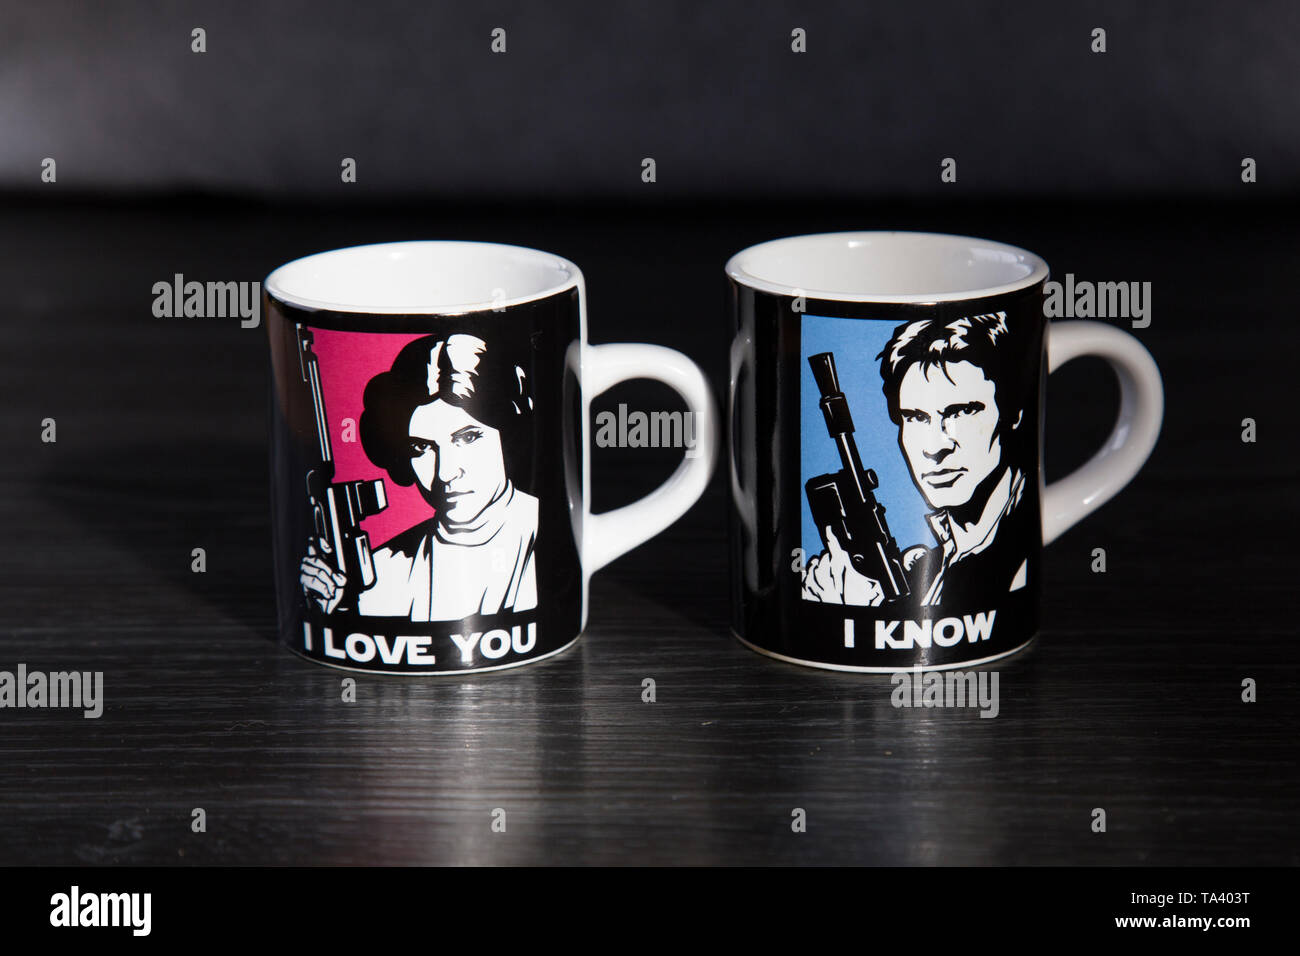 Two Star Wars branded espresso cups. One with Princess Leia saying I love you and the other with Han Solo saying I know. On wooden bench top. Stock Photo